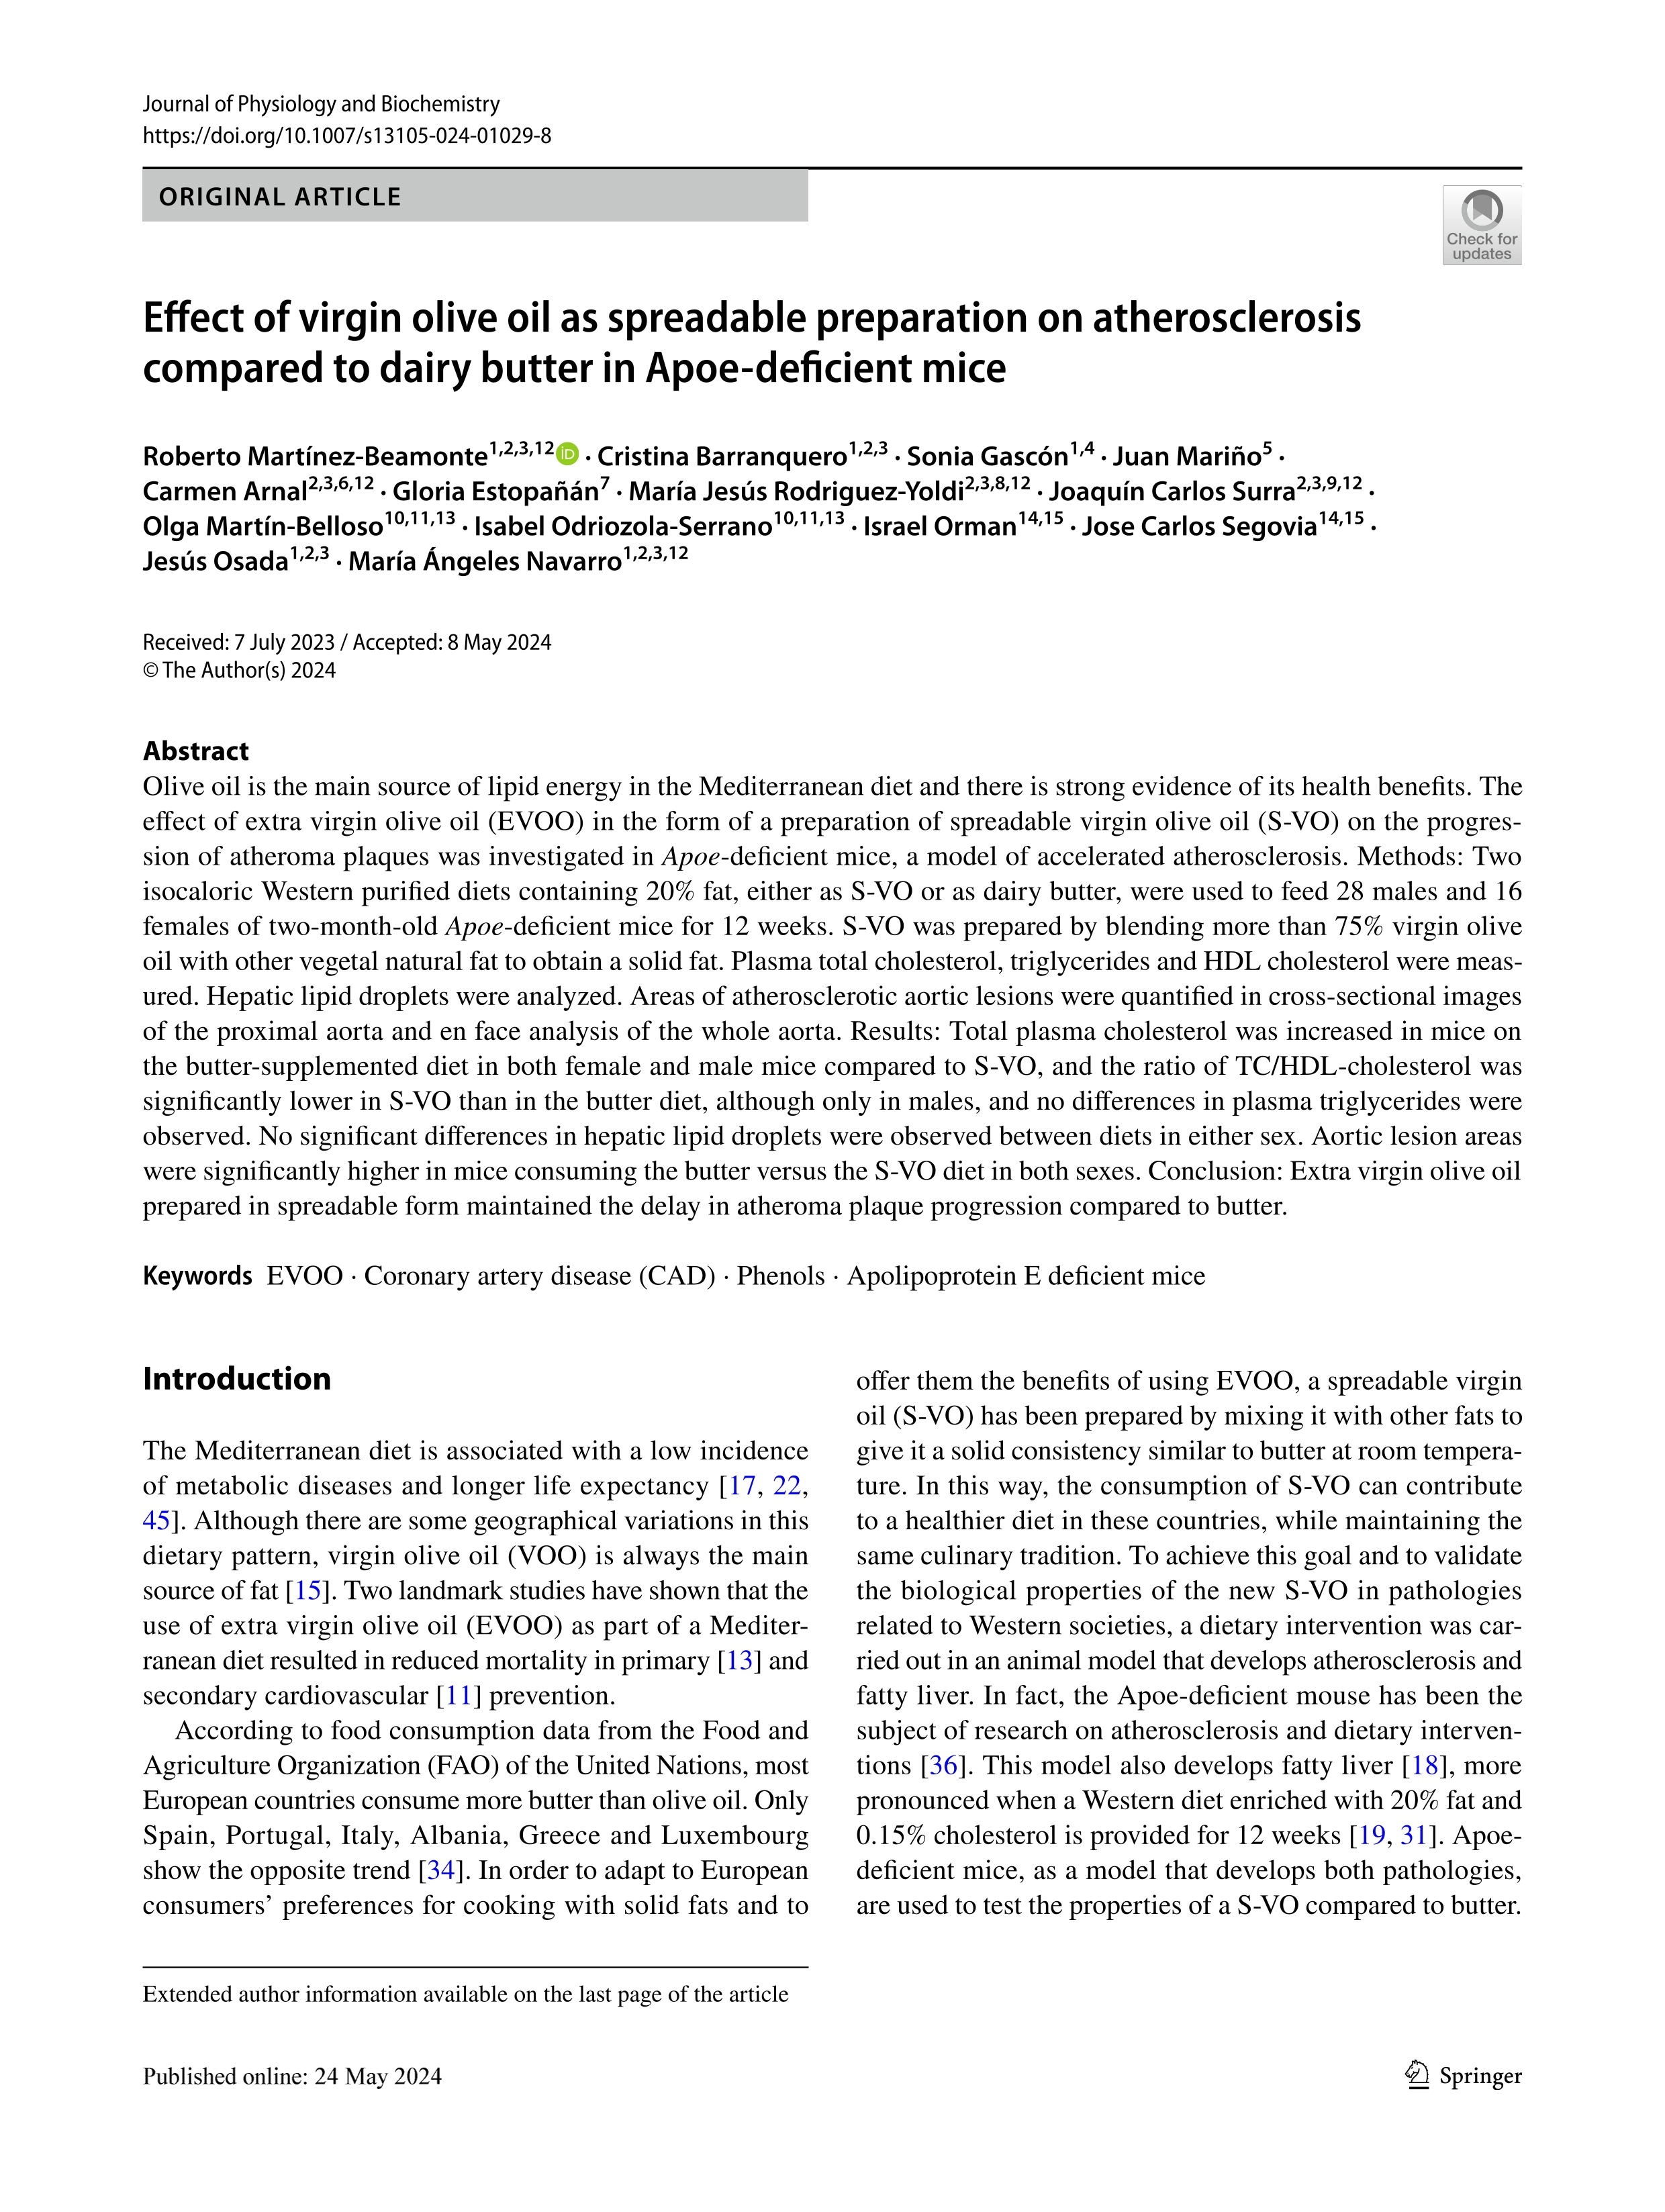 Effect of virgin olive oil as spreadable preparation on atherosclerosis compared to dairy butter in Apoe-deficient mice